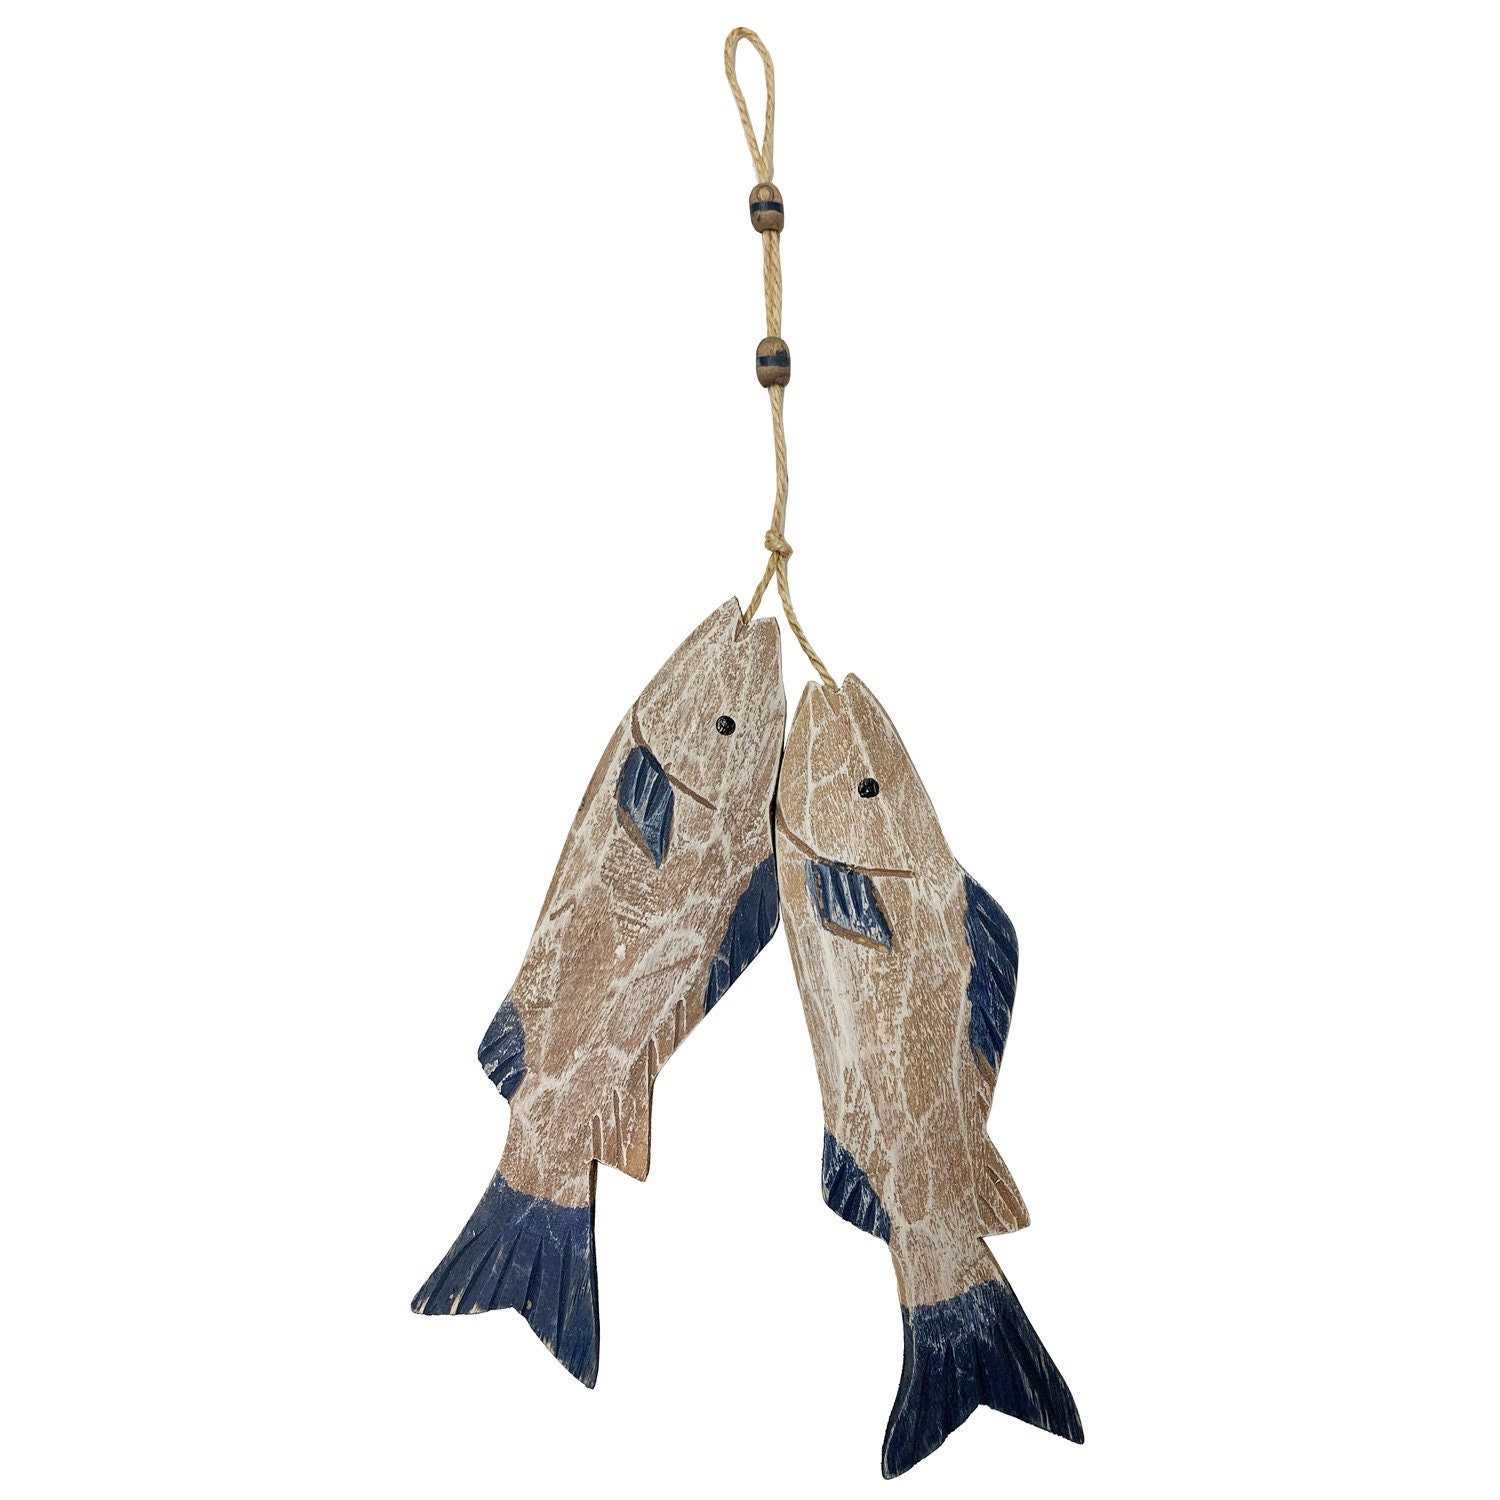 Antique Wood Fish Vintage Decor Ornament Wall Hanging Hand Carved Wooden  Fish Decorations for Home Nautical Theme - Small